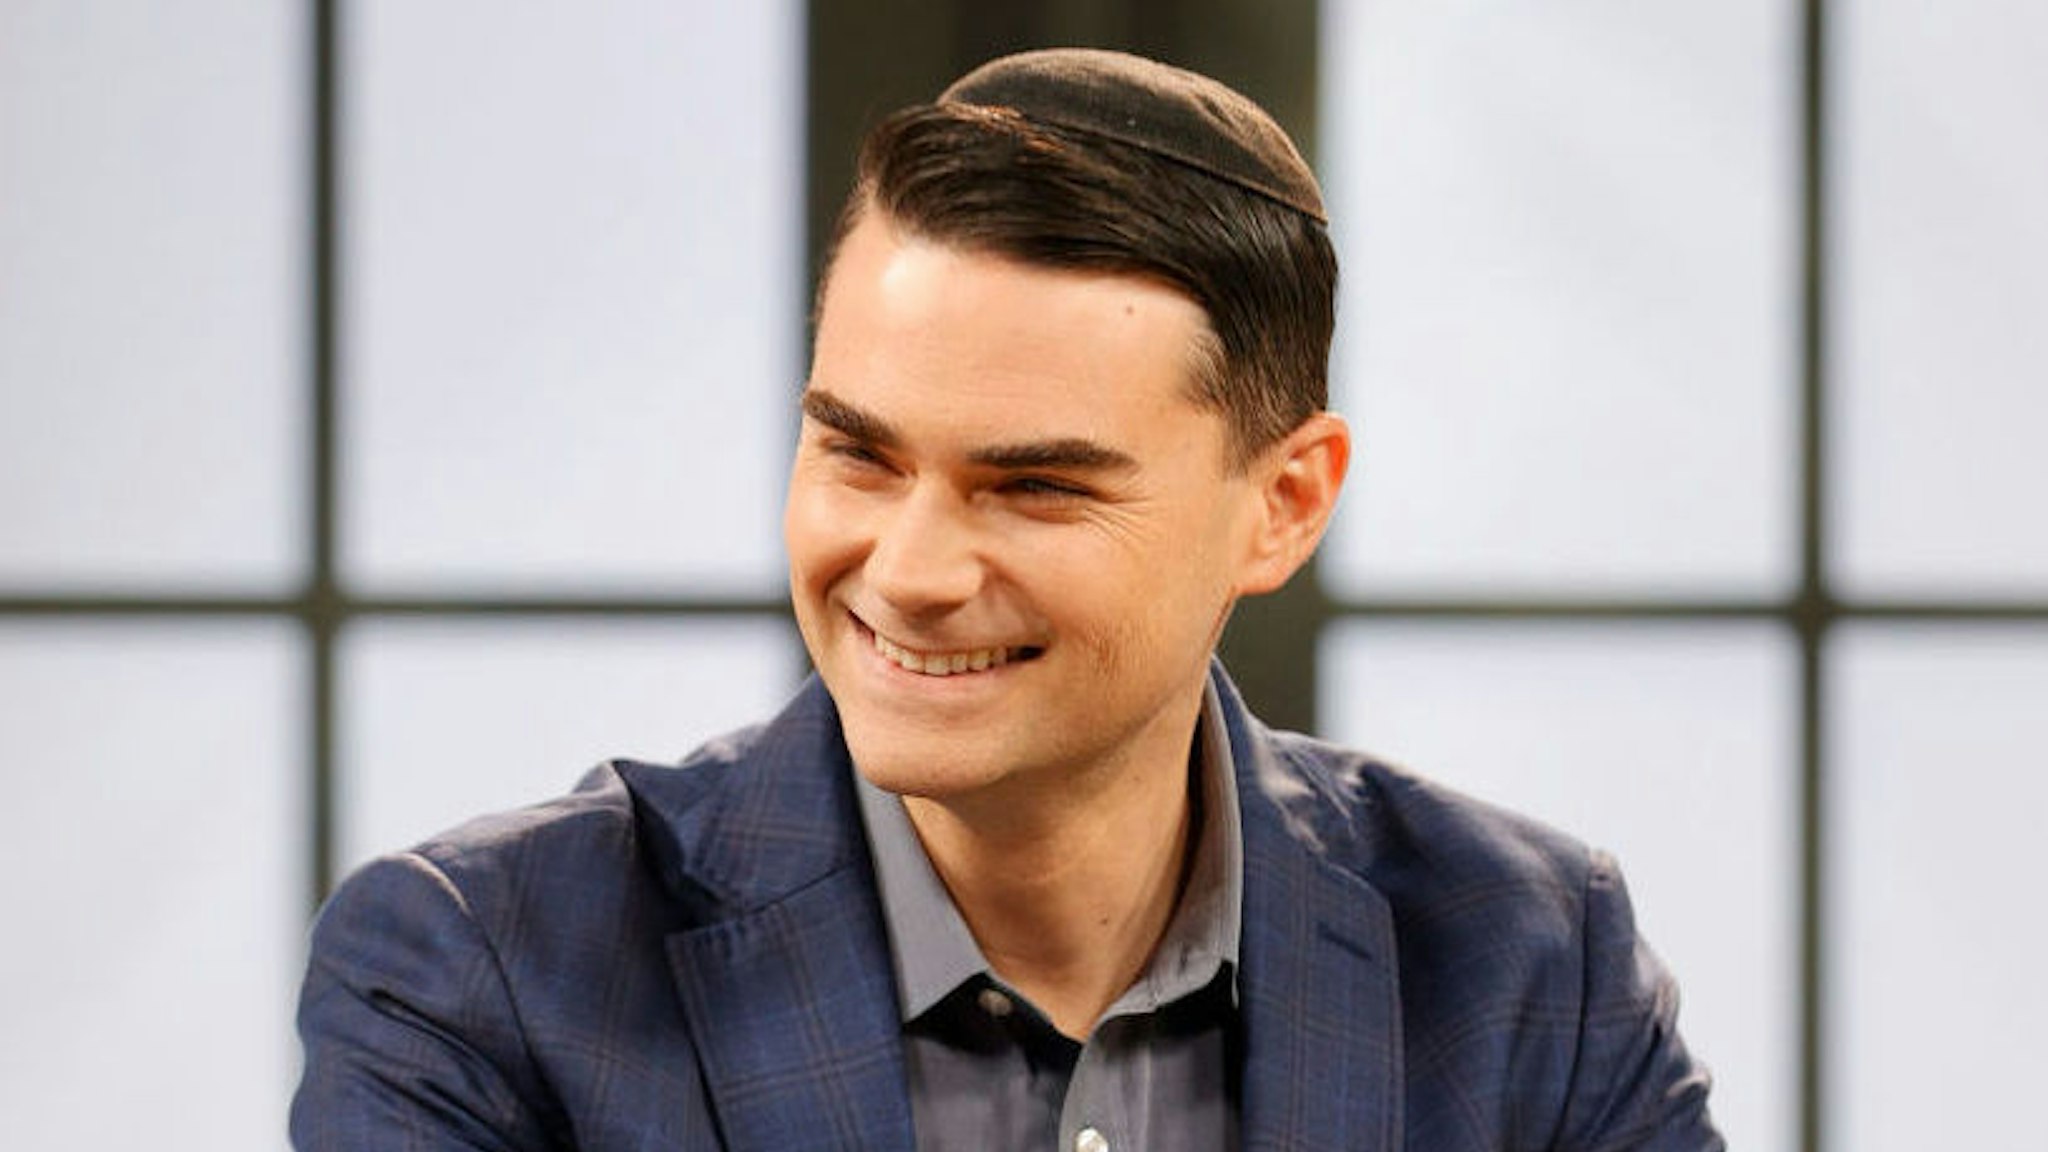 NASHVILLE, TENNESSEE - MARCH 17: American commentator Ben Shapiro is seen on set during a taping of "Candace" on March 17, 2021 in Nashville, Tennessee. The show will air on Friday, March 19, 2021. (Jason Kempin/Getty Images)